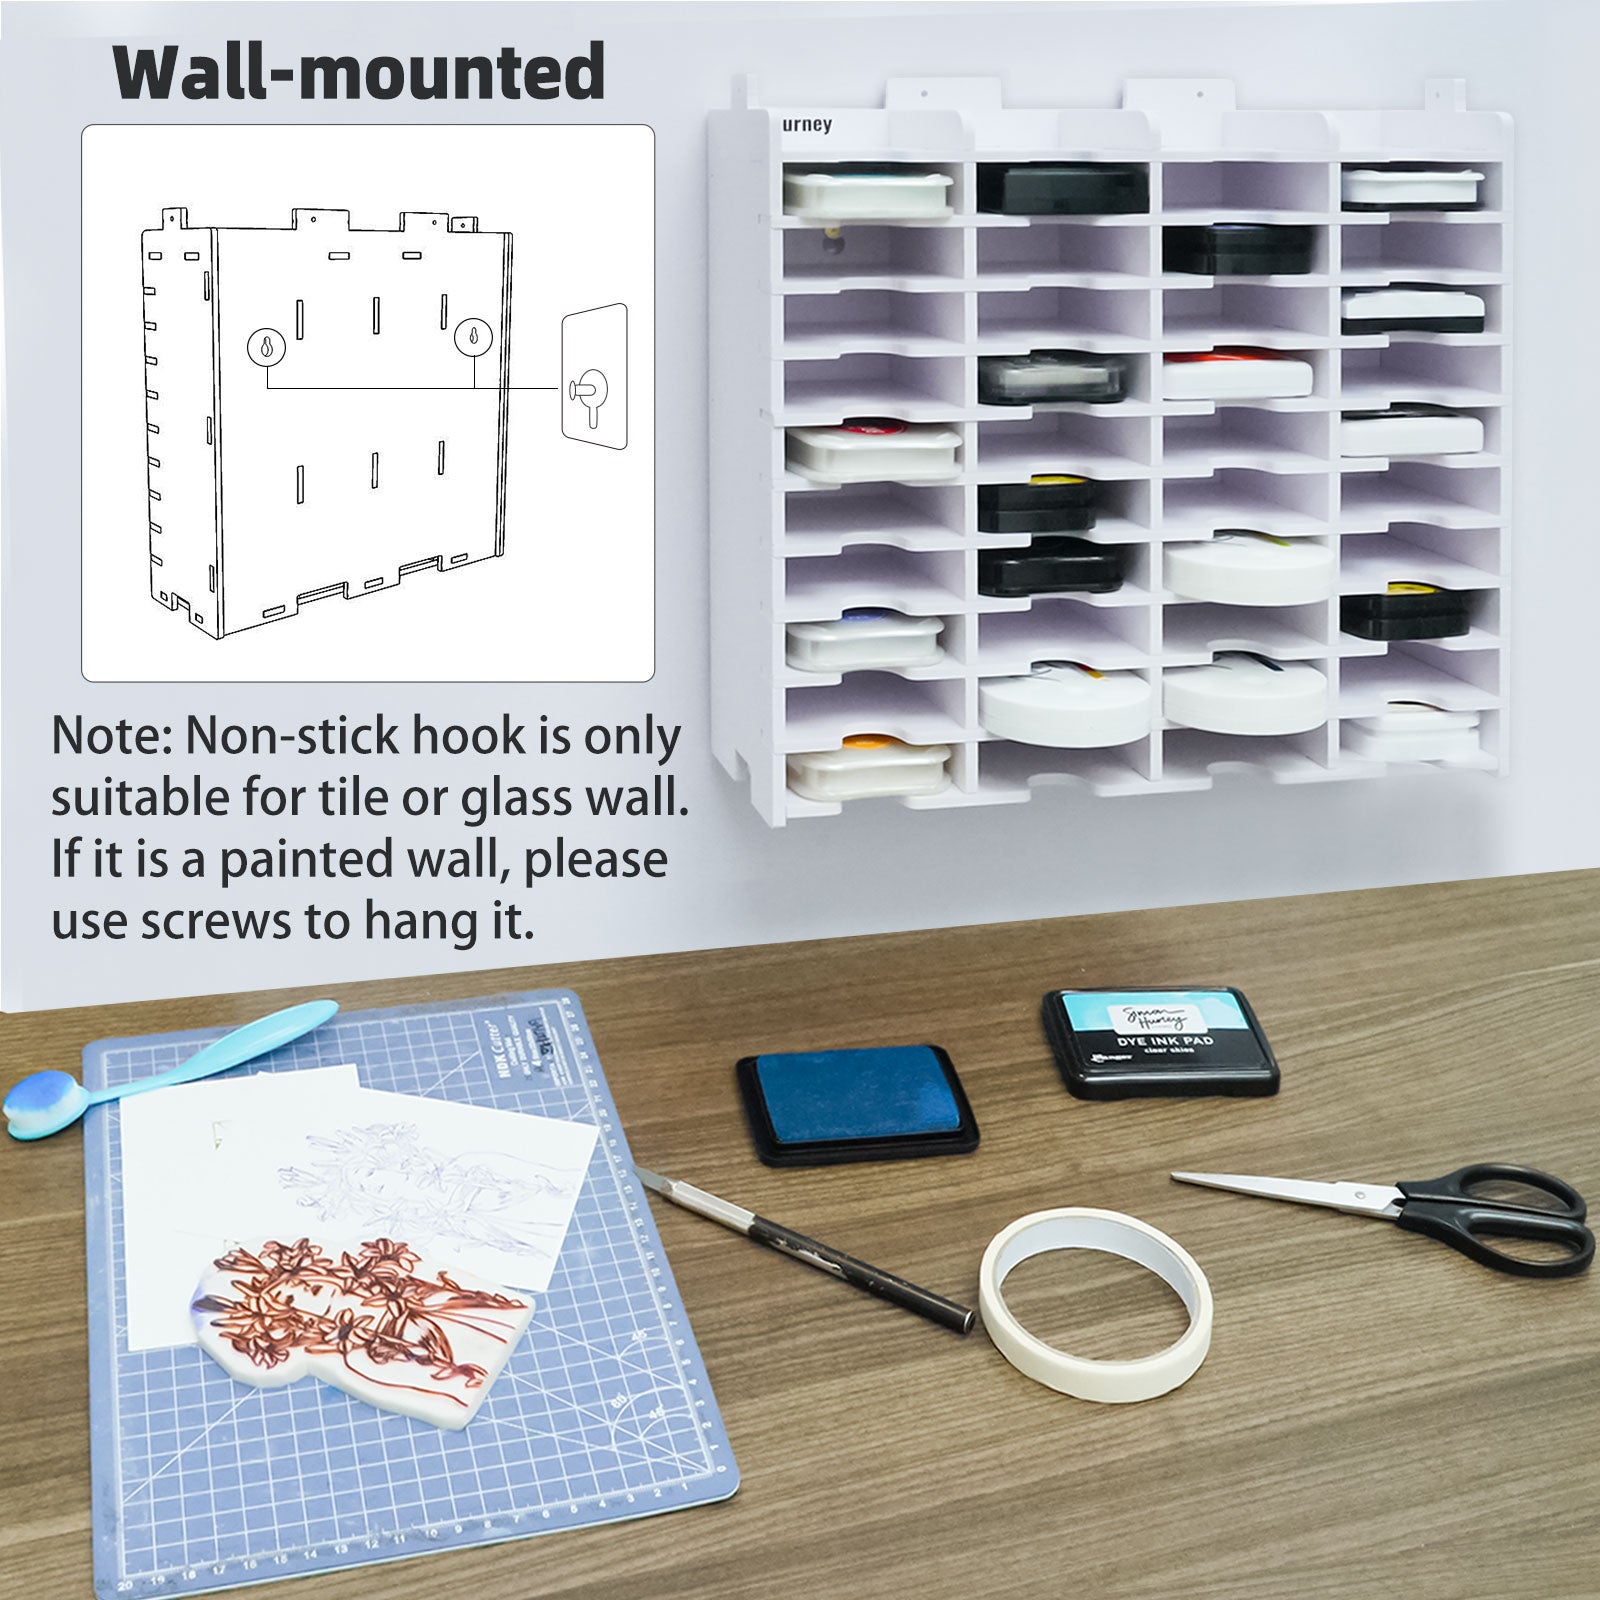 Ink Pad Storage Organization – The Country Hive